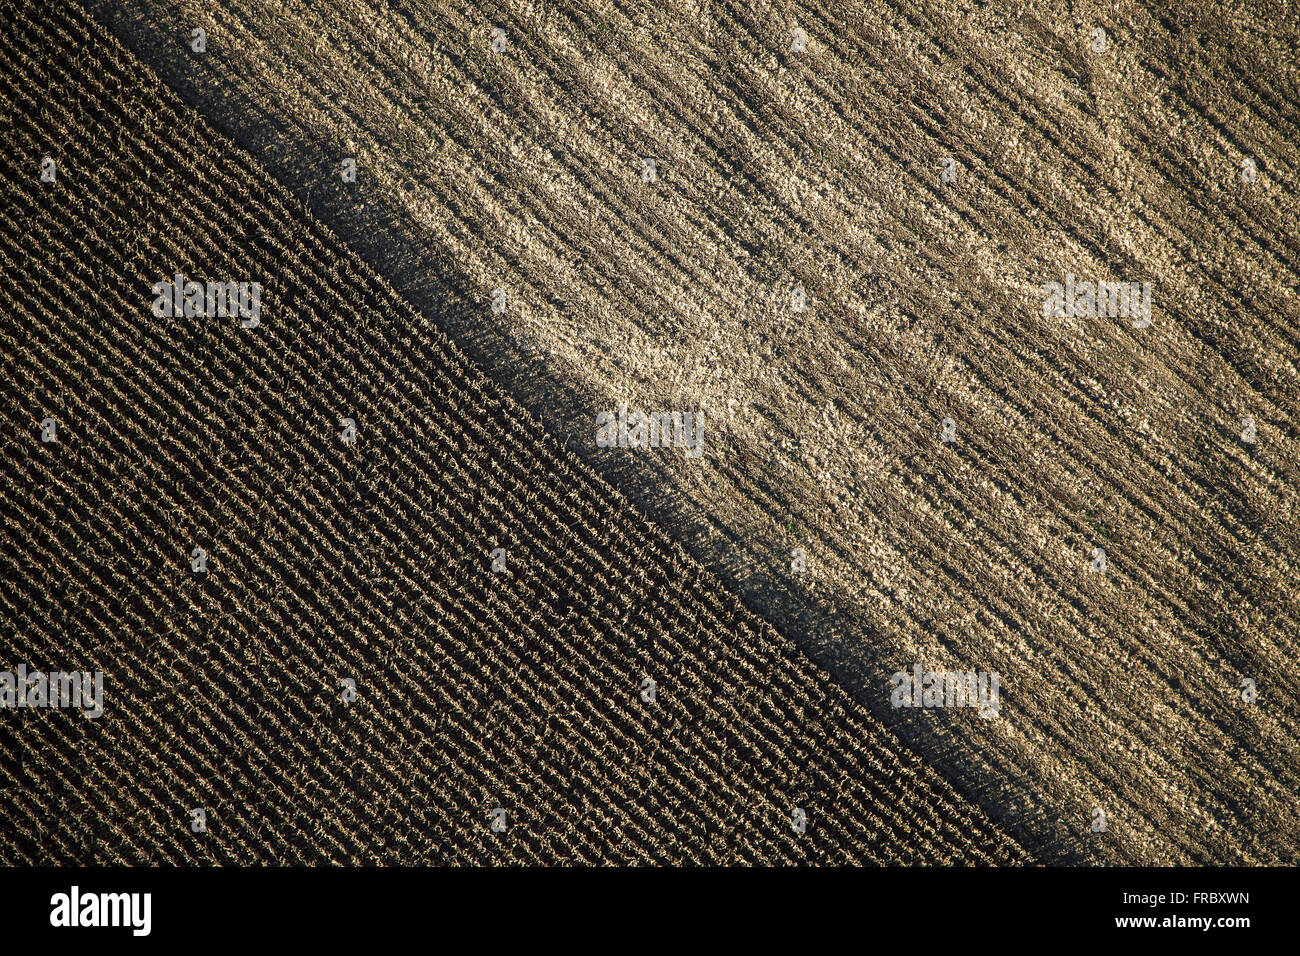 Aerial view of planting corn Stock Photo